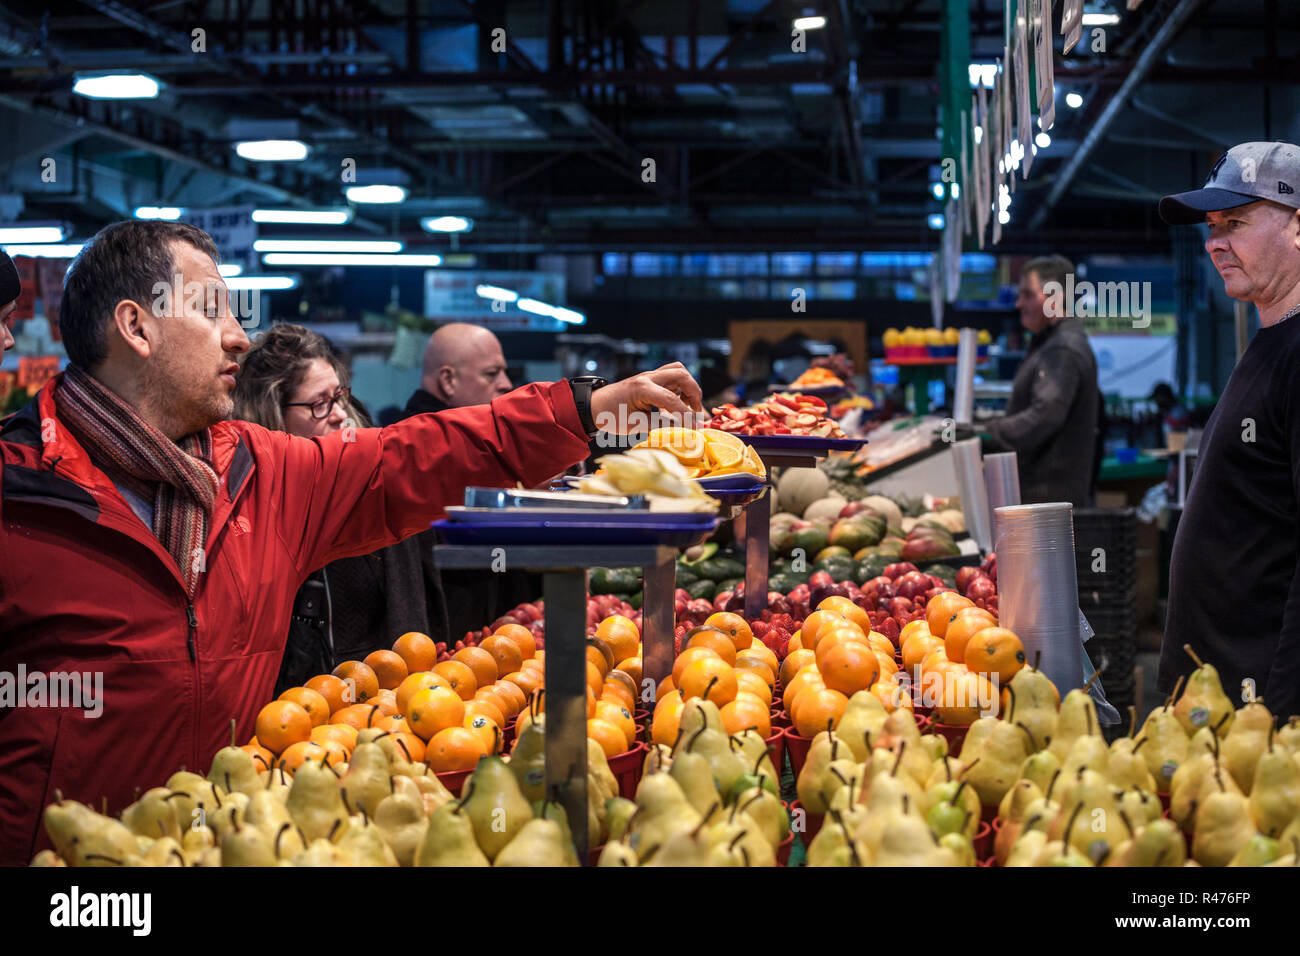 MONTREAL, CANADA - NOVEMBER 3, 2018: Canadian man tasting samples of oranges in Jean Talon Market, in Montreal, Quebec. It is a major landmark & a sym Stock Photo